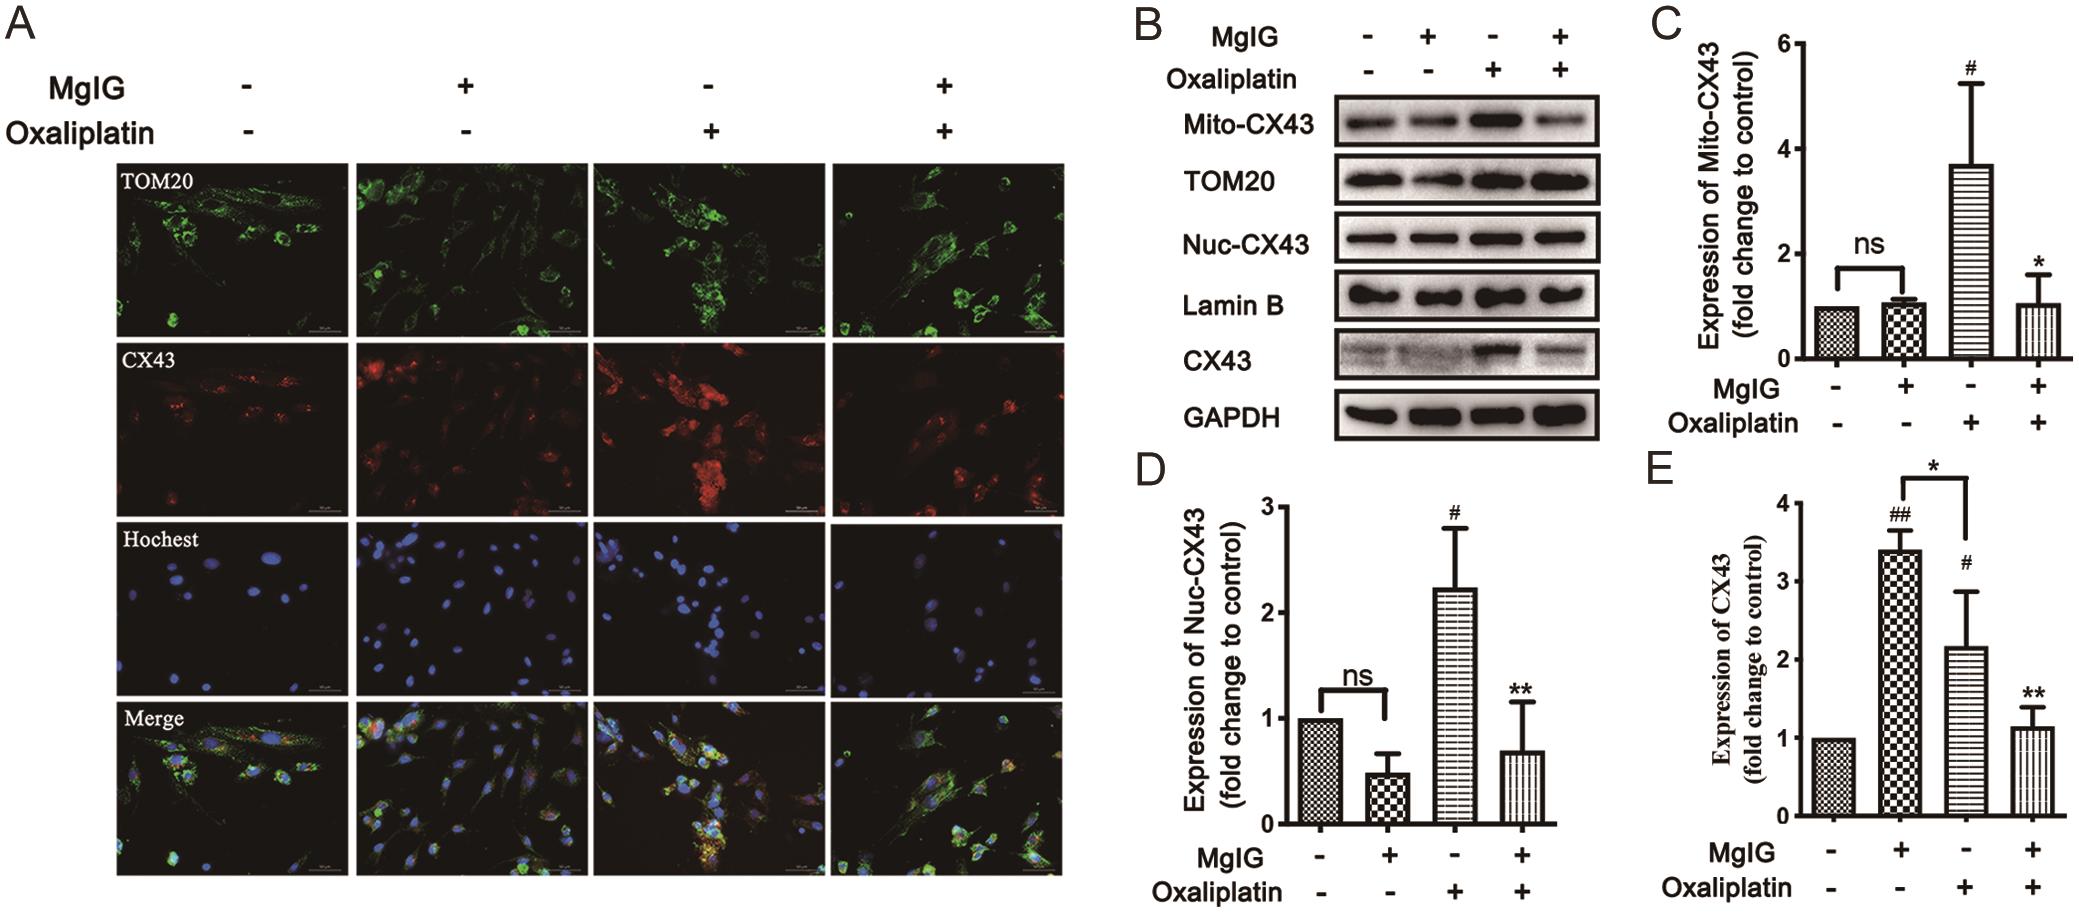 MgIG (40 μg/mL) inhibited mitochondrial Cx43 expression in HSCs induced by oxaliplatin (2 μg/mL) in LX-2 human HSC cell lines.